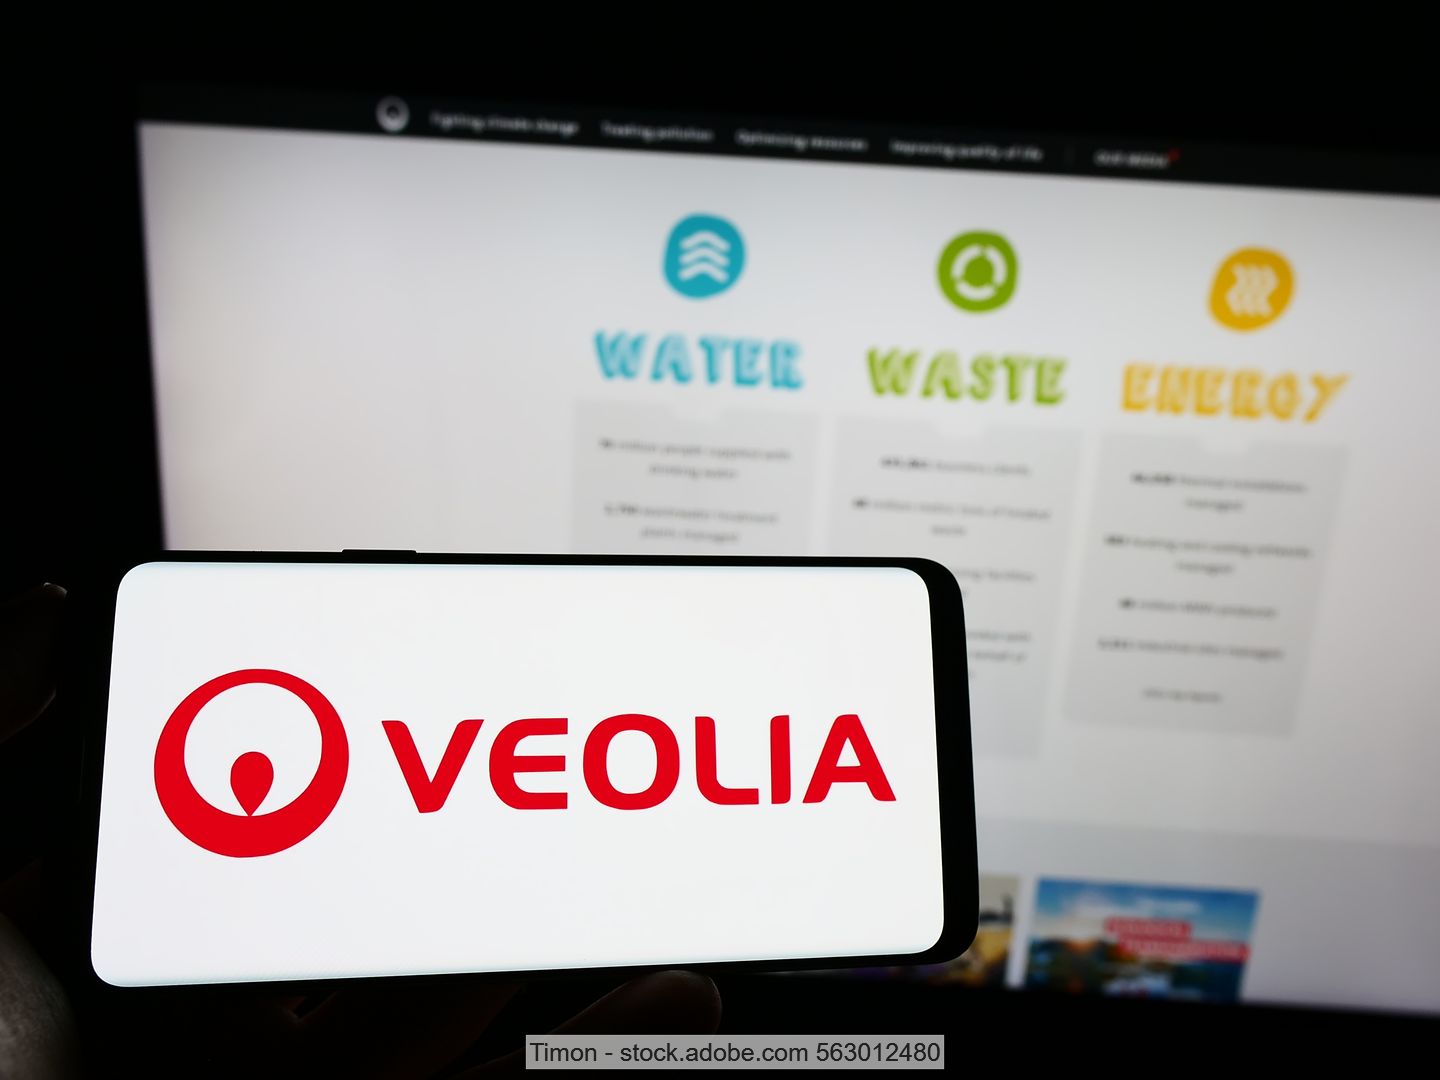 Photo of a computer screen showing the three Veolia divisions: water, waste and energy; in the foreground mobile phone screen with the group‘s logo.